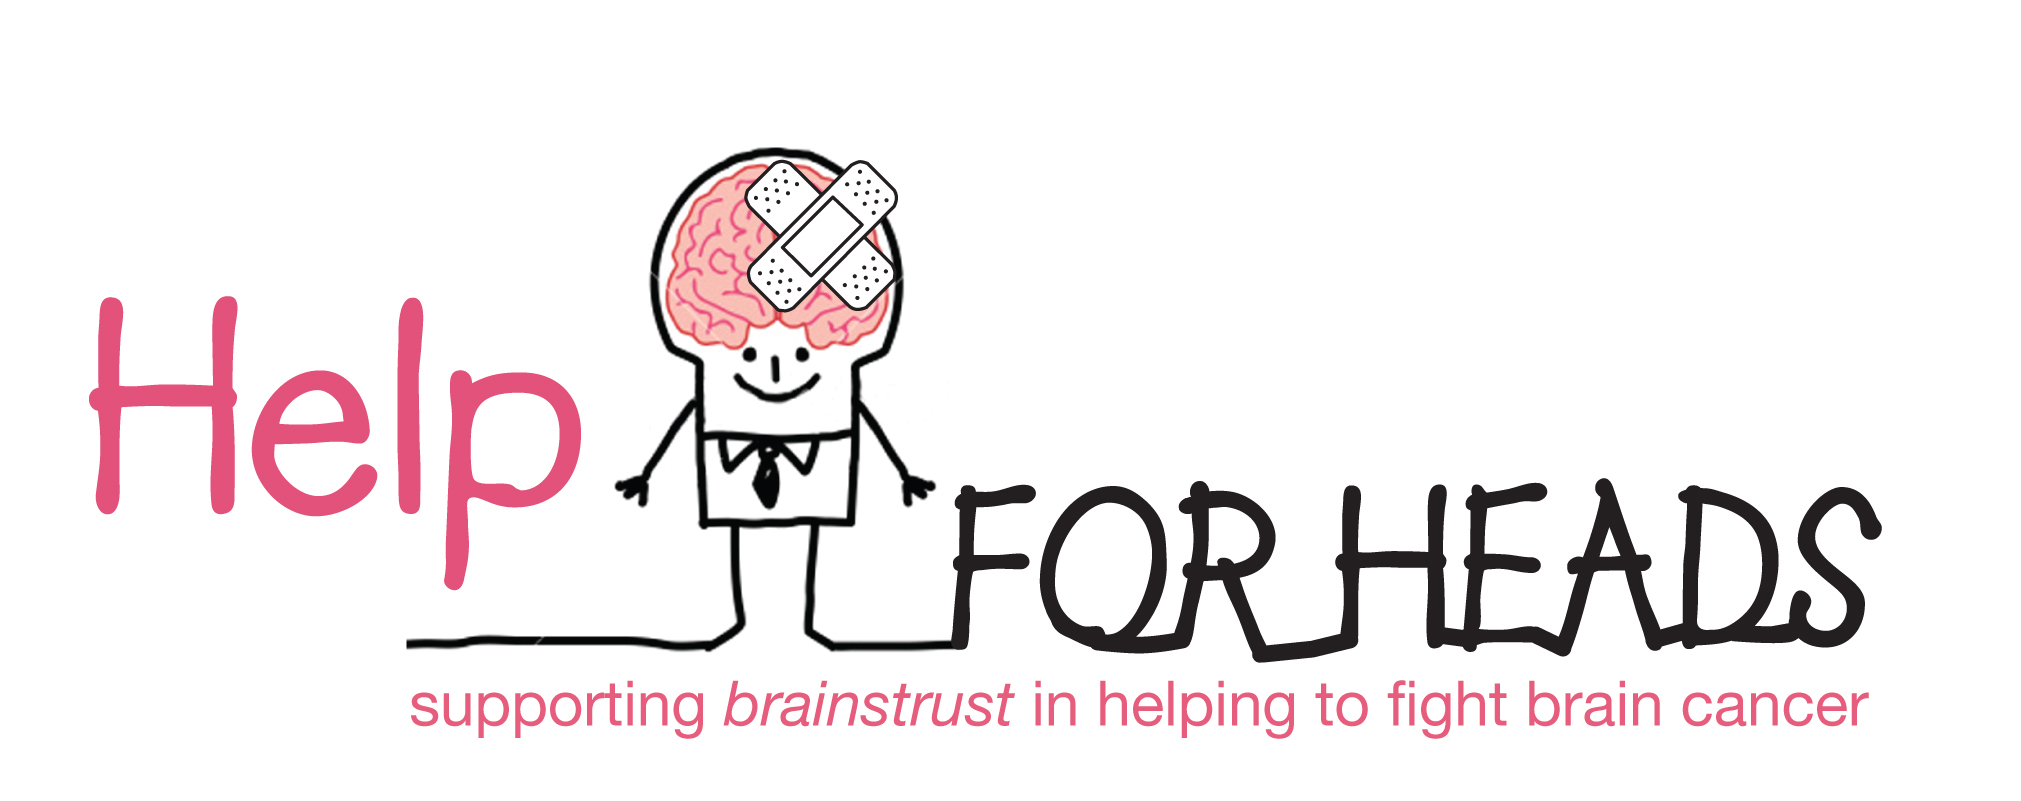 help for heads - raising funds for brainstrust brain tumour charity